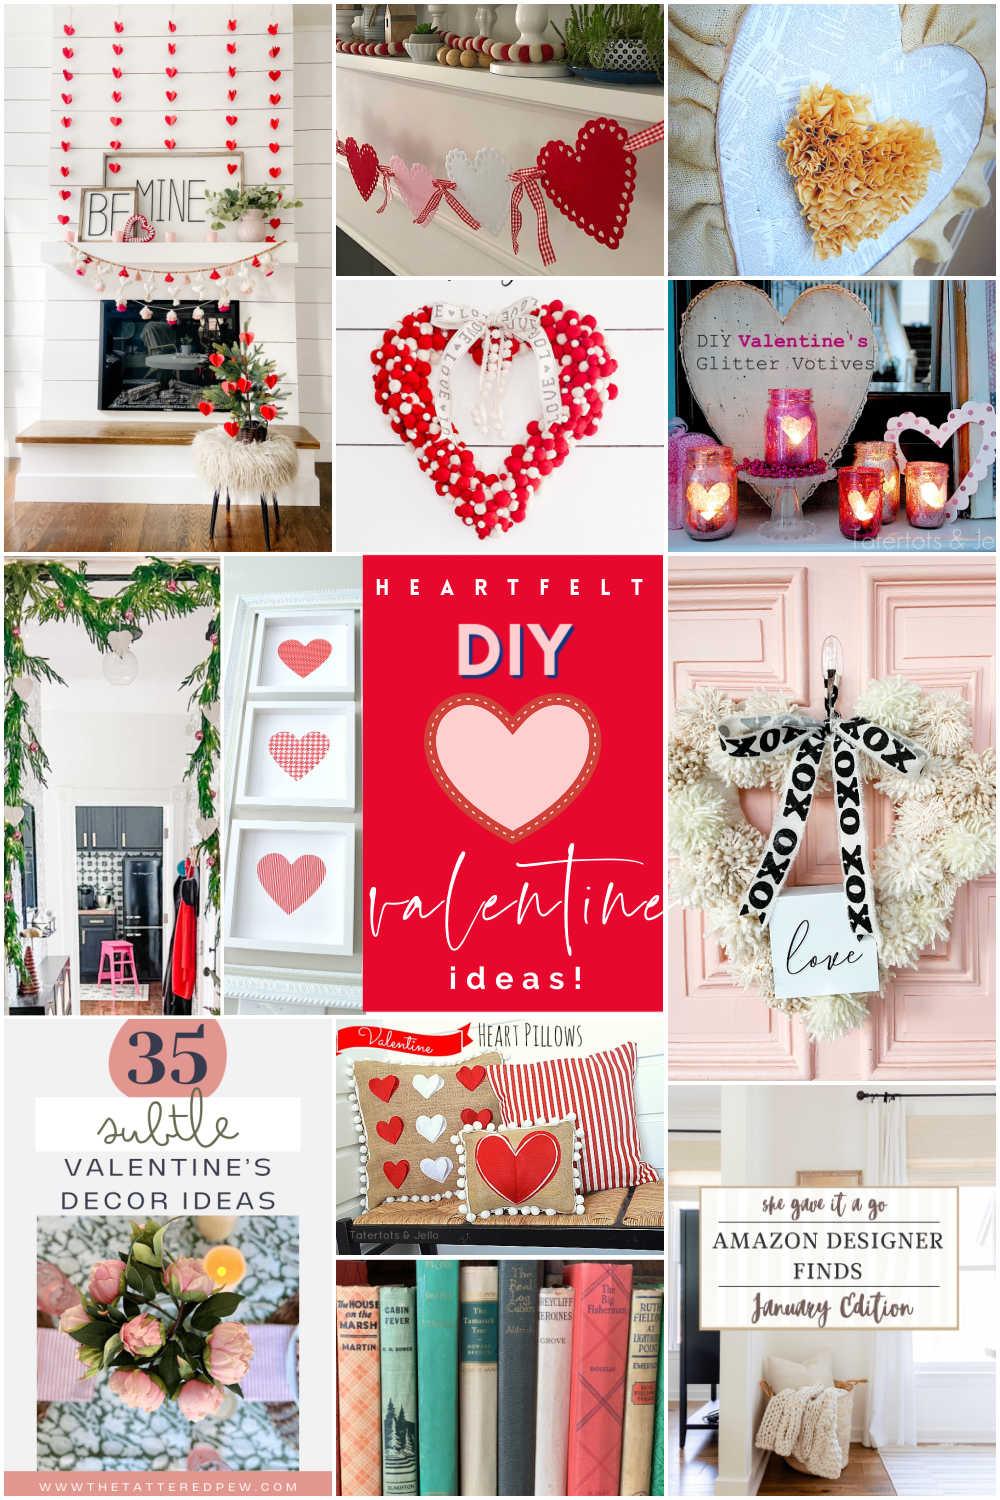 Heartfelt DIY Valentine's Day Ideas - DIY projects, crafts and more!